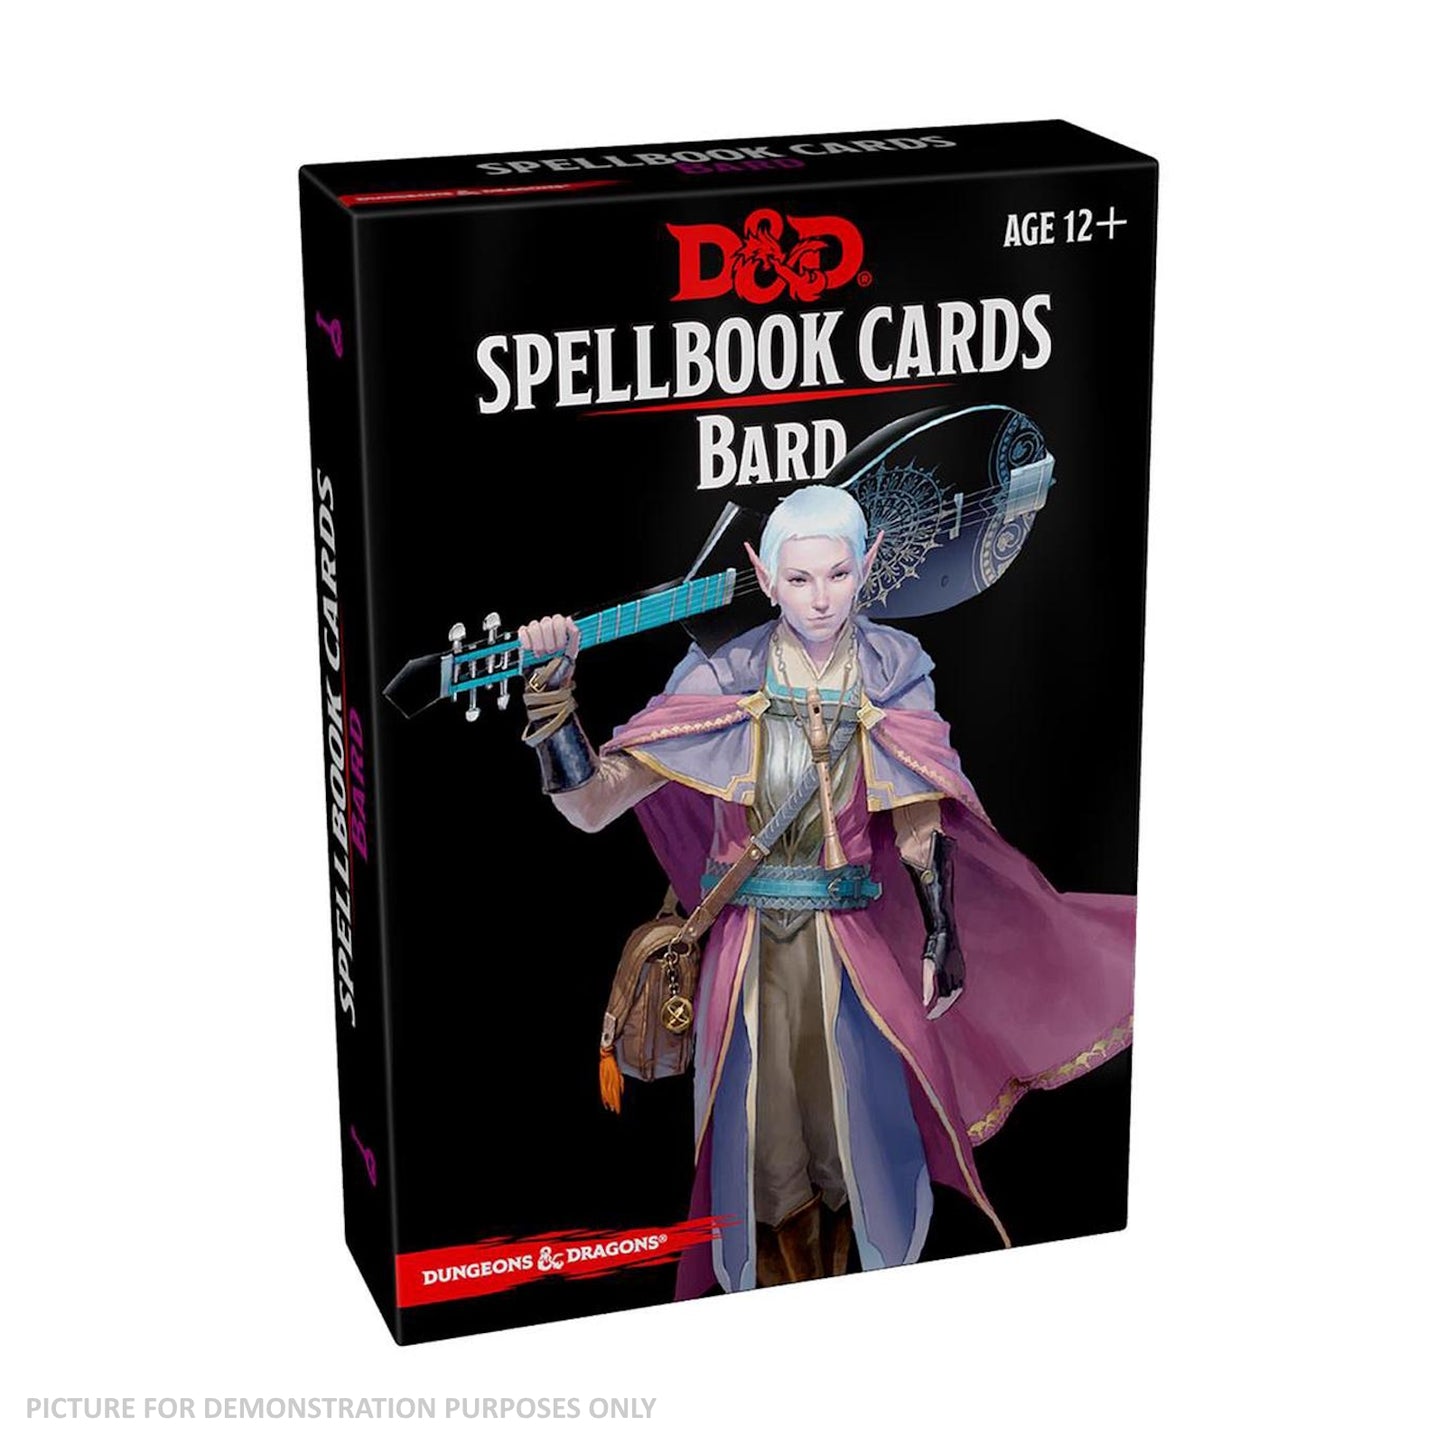 Dungeons & Dragons Spellbook Cards Bard Deck Revised 2017 Edition